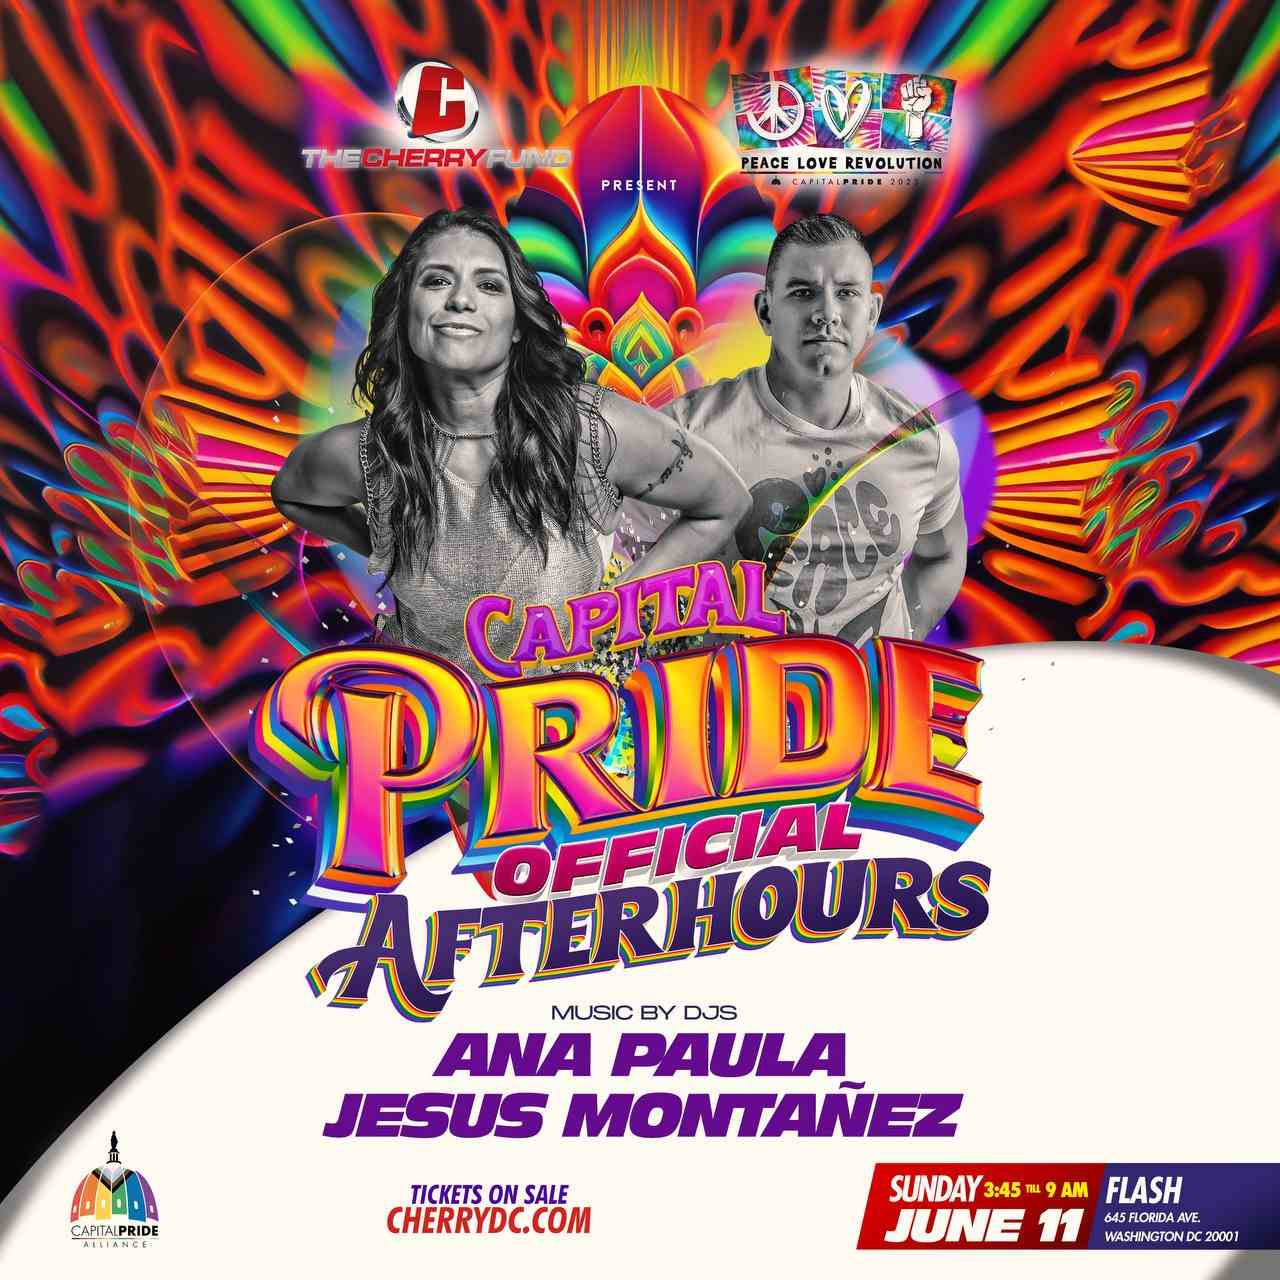 Capital Pride Official Afterhours Presented by The Cherry Fund event flyer